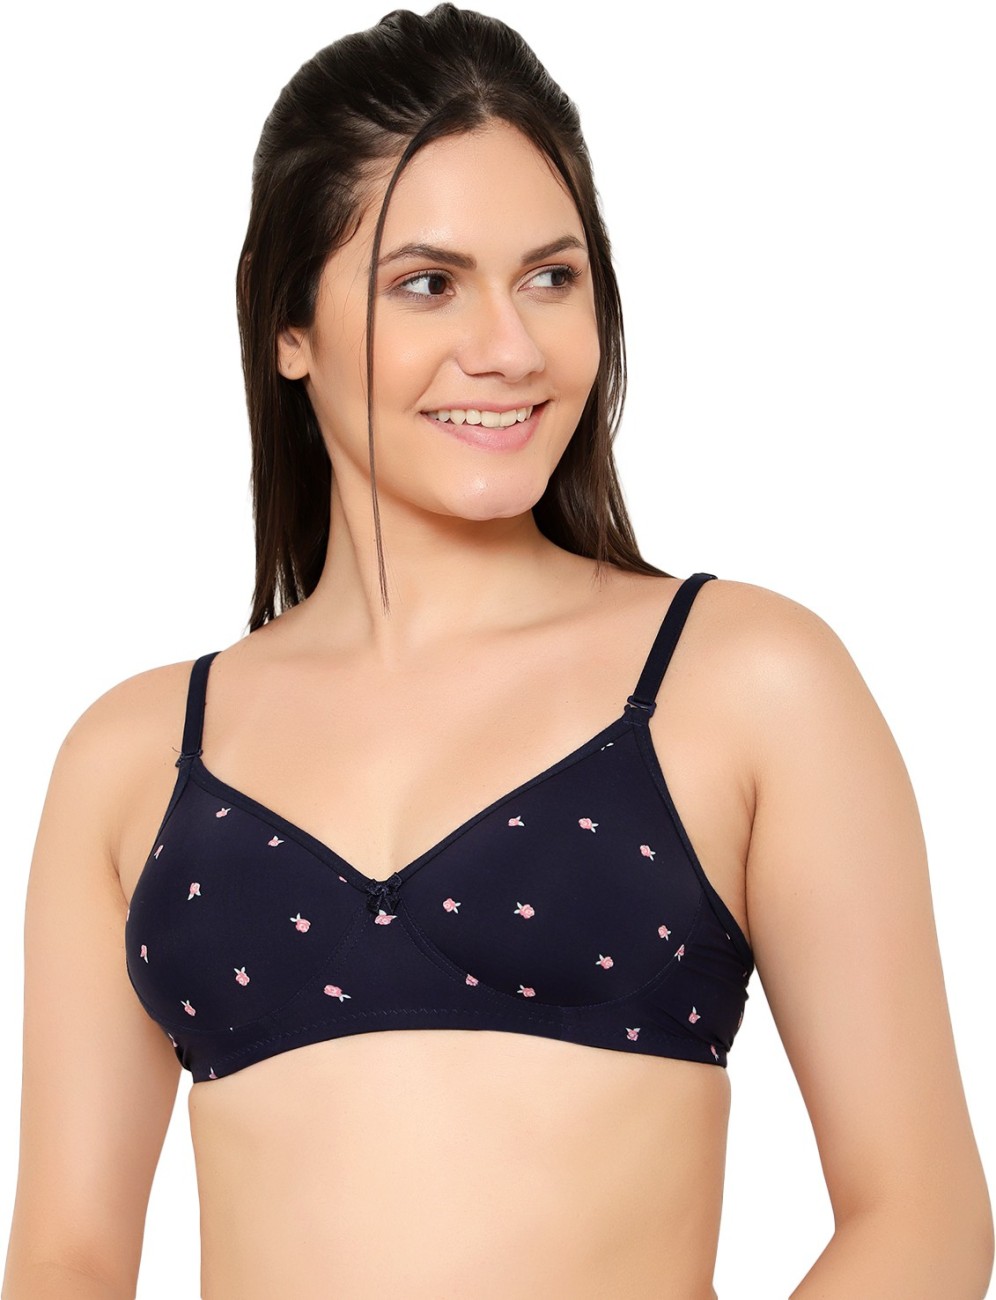 Women's Smooth Full Coverage No Padding Underwire Seamless